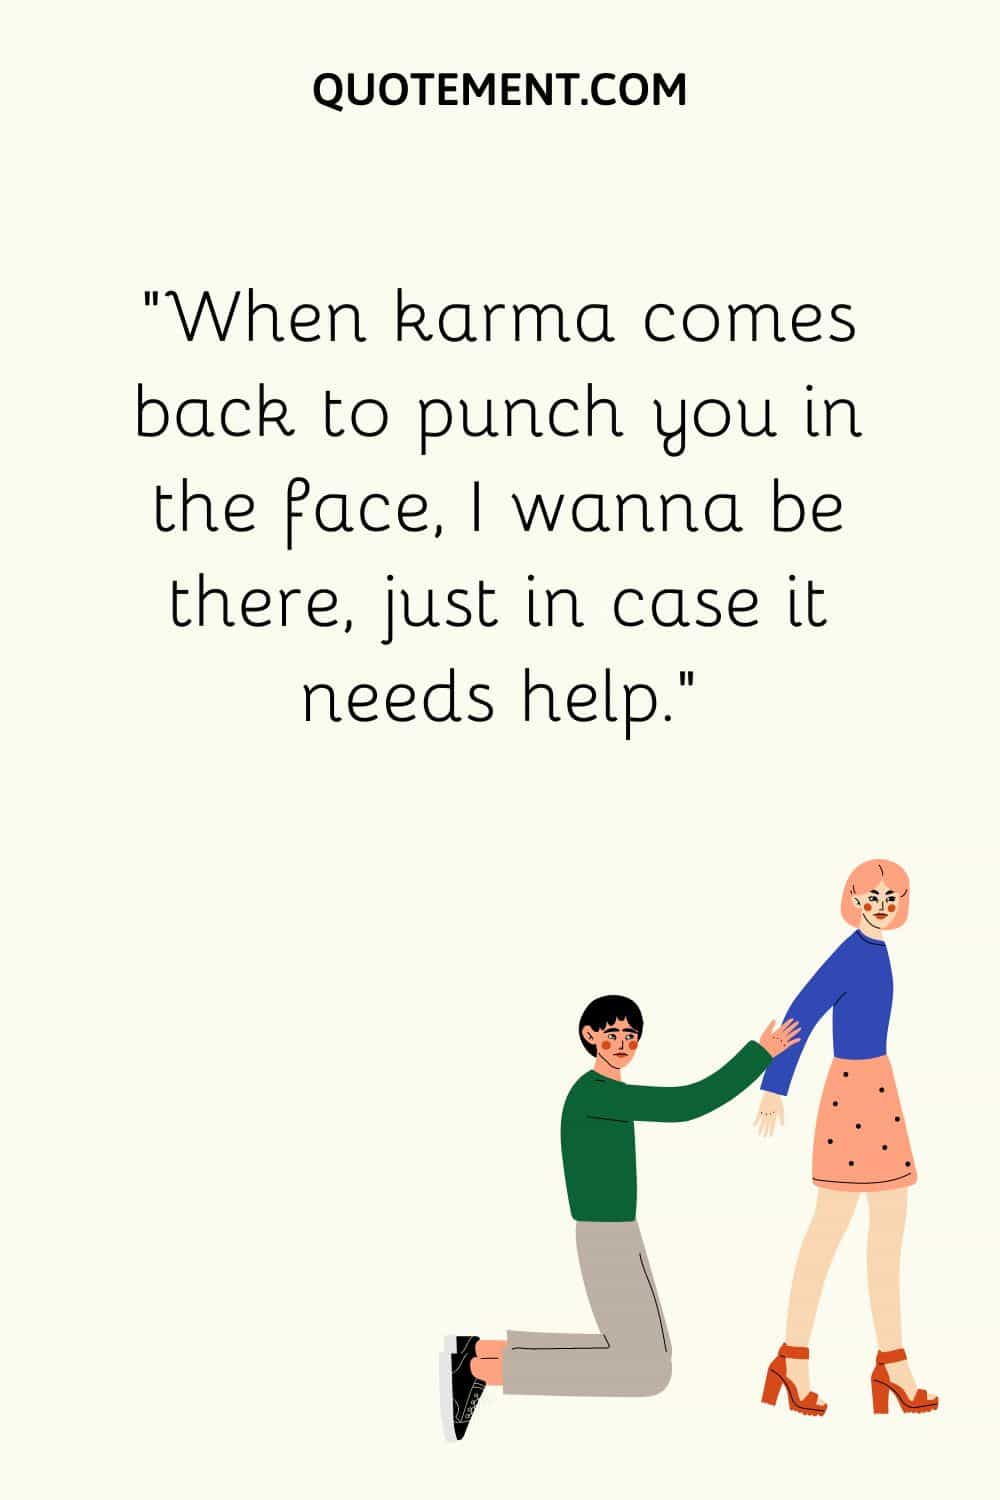 When karma comes back to punch you in the face, I wanna be there, just in case it needs help